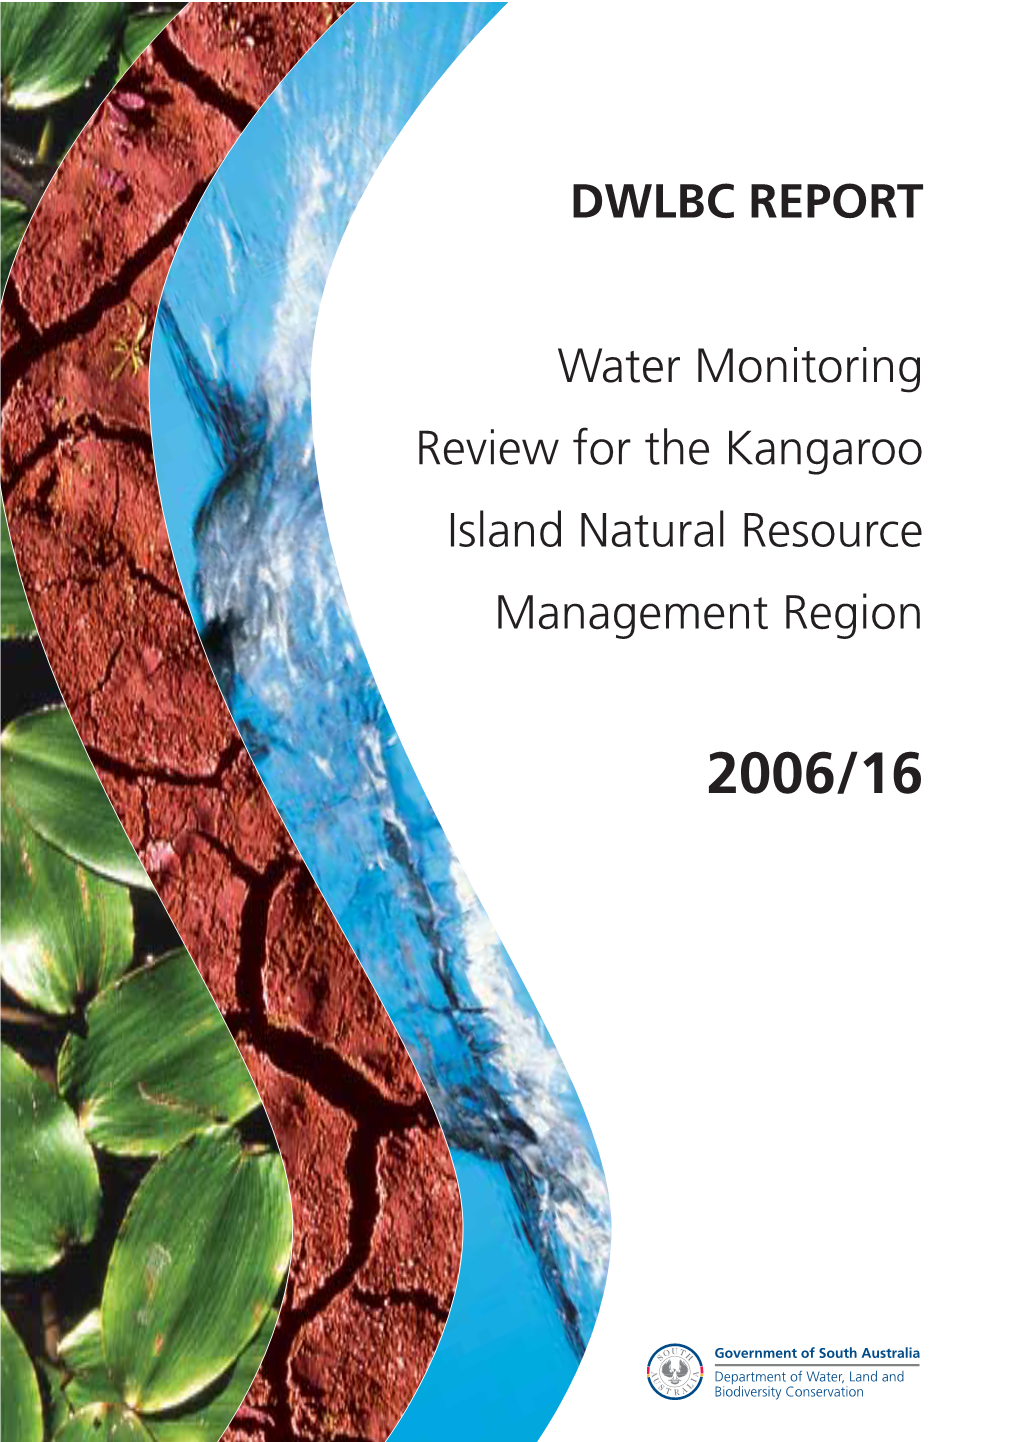 Water Monitoring Review for the Kangaroo Island Natural Resource Management Region